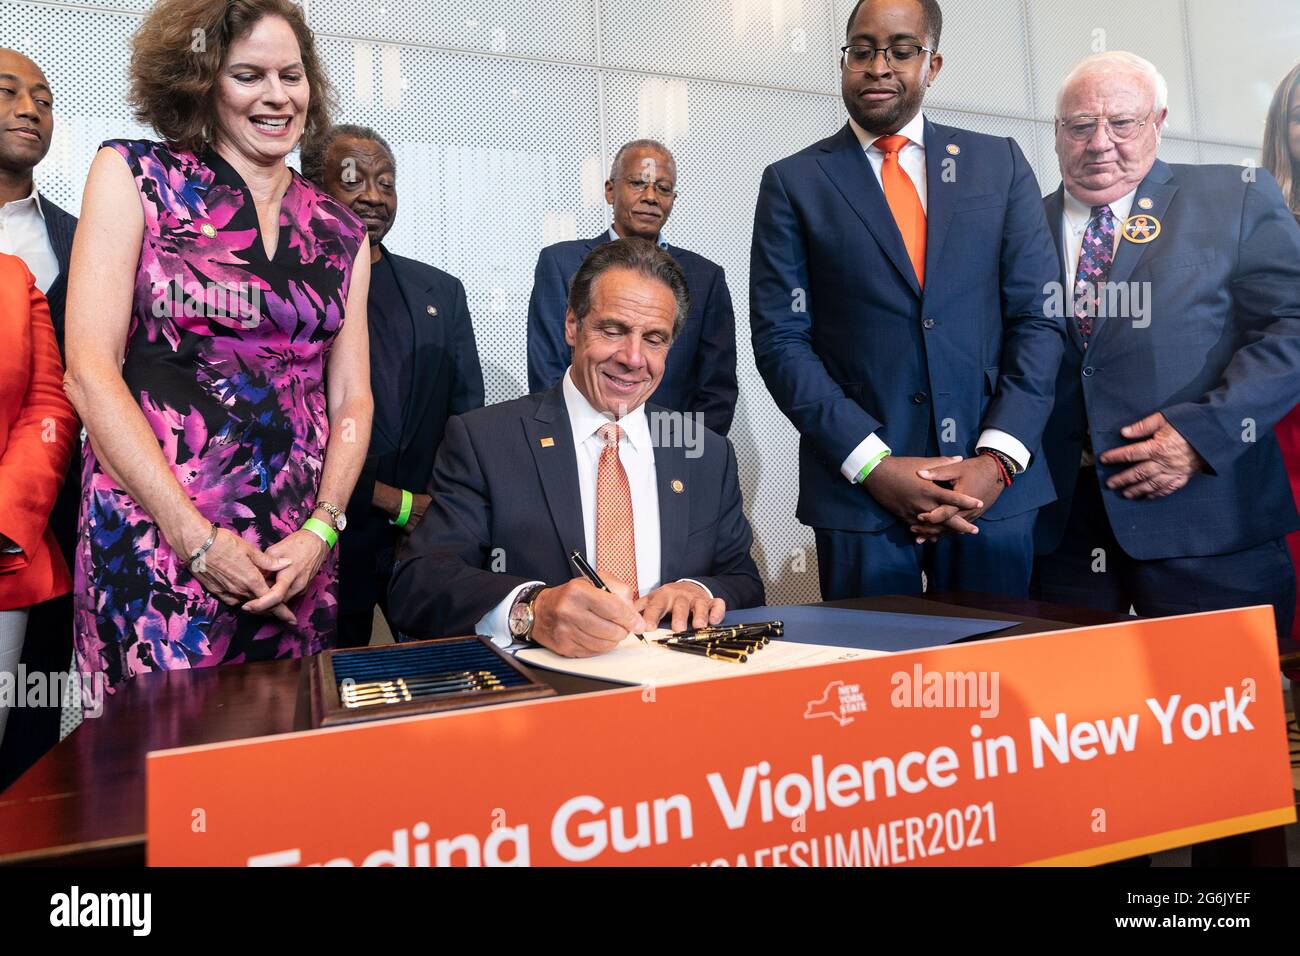 Governor Andrew Cuomo makes an announcement regarding gun violence in the state at John Jay College of Criminal Justice in New York on July 6, 2021. Governor declared Disaster Emergency in order to tackled gun violence across the state. He announced the program to create well paying jobs, education, sport programs with investment by state by $138, 7 million. He was joined by anti-gun activists, clergy and union leaders who will help to implement this program. He also signed legislation Hold Gun Manufacturers Liable for Their Products Creating a Public Nuisance and closing loophole allowing peo Stock Photo